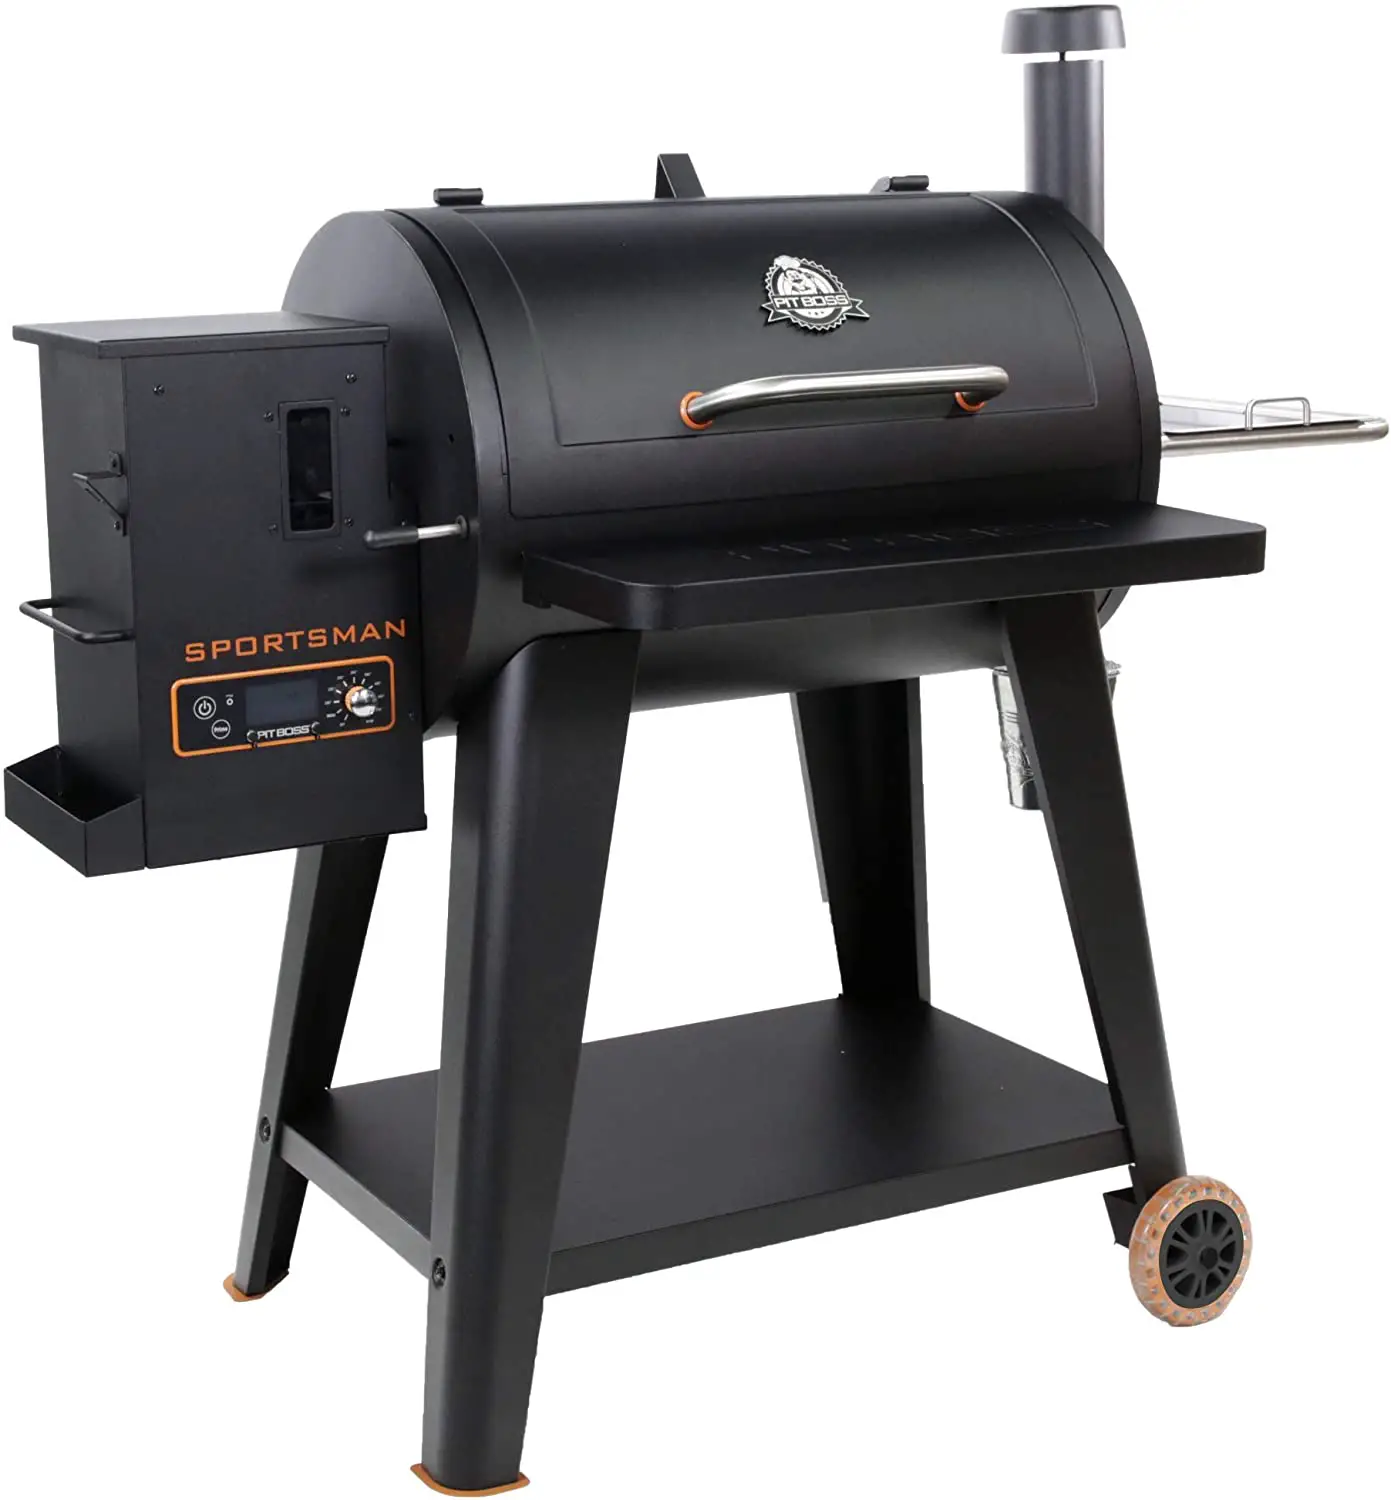 Traeger vs Pit Boss Pellet Grill: Which is Better?